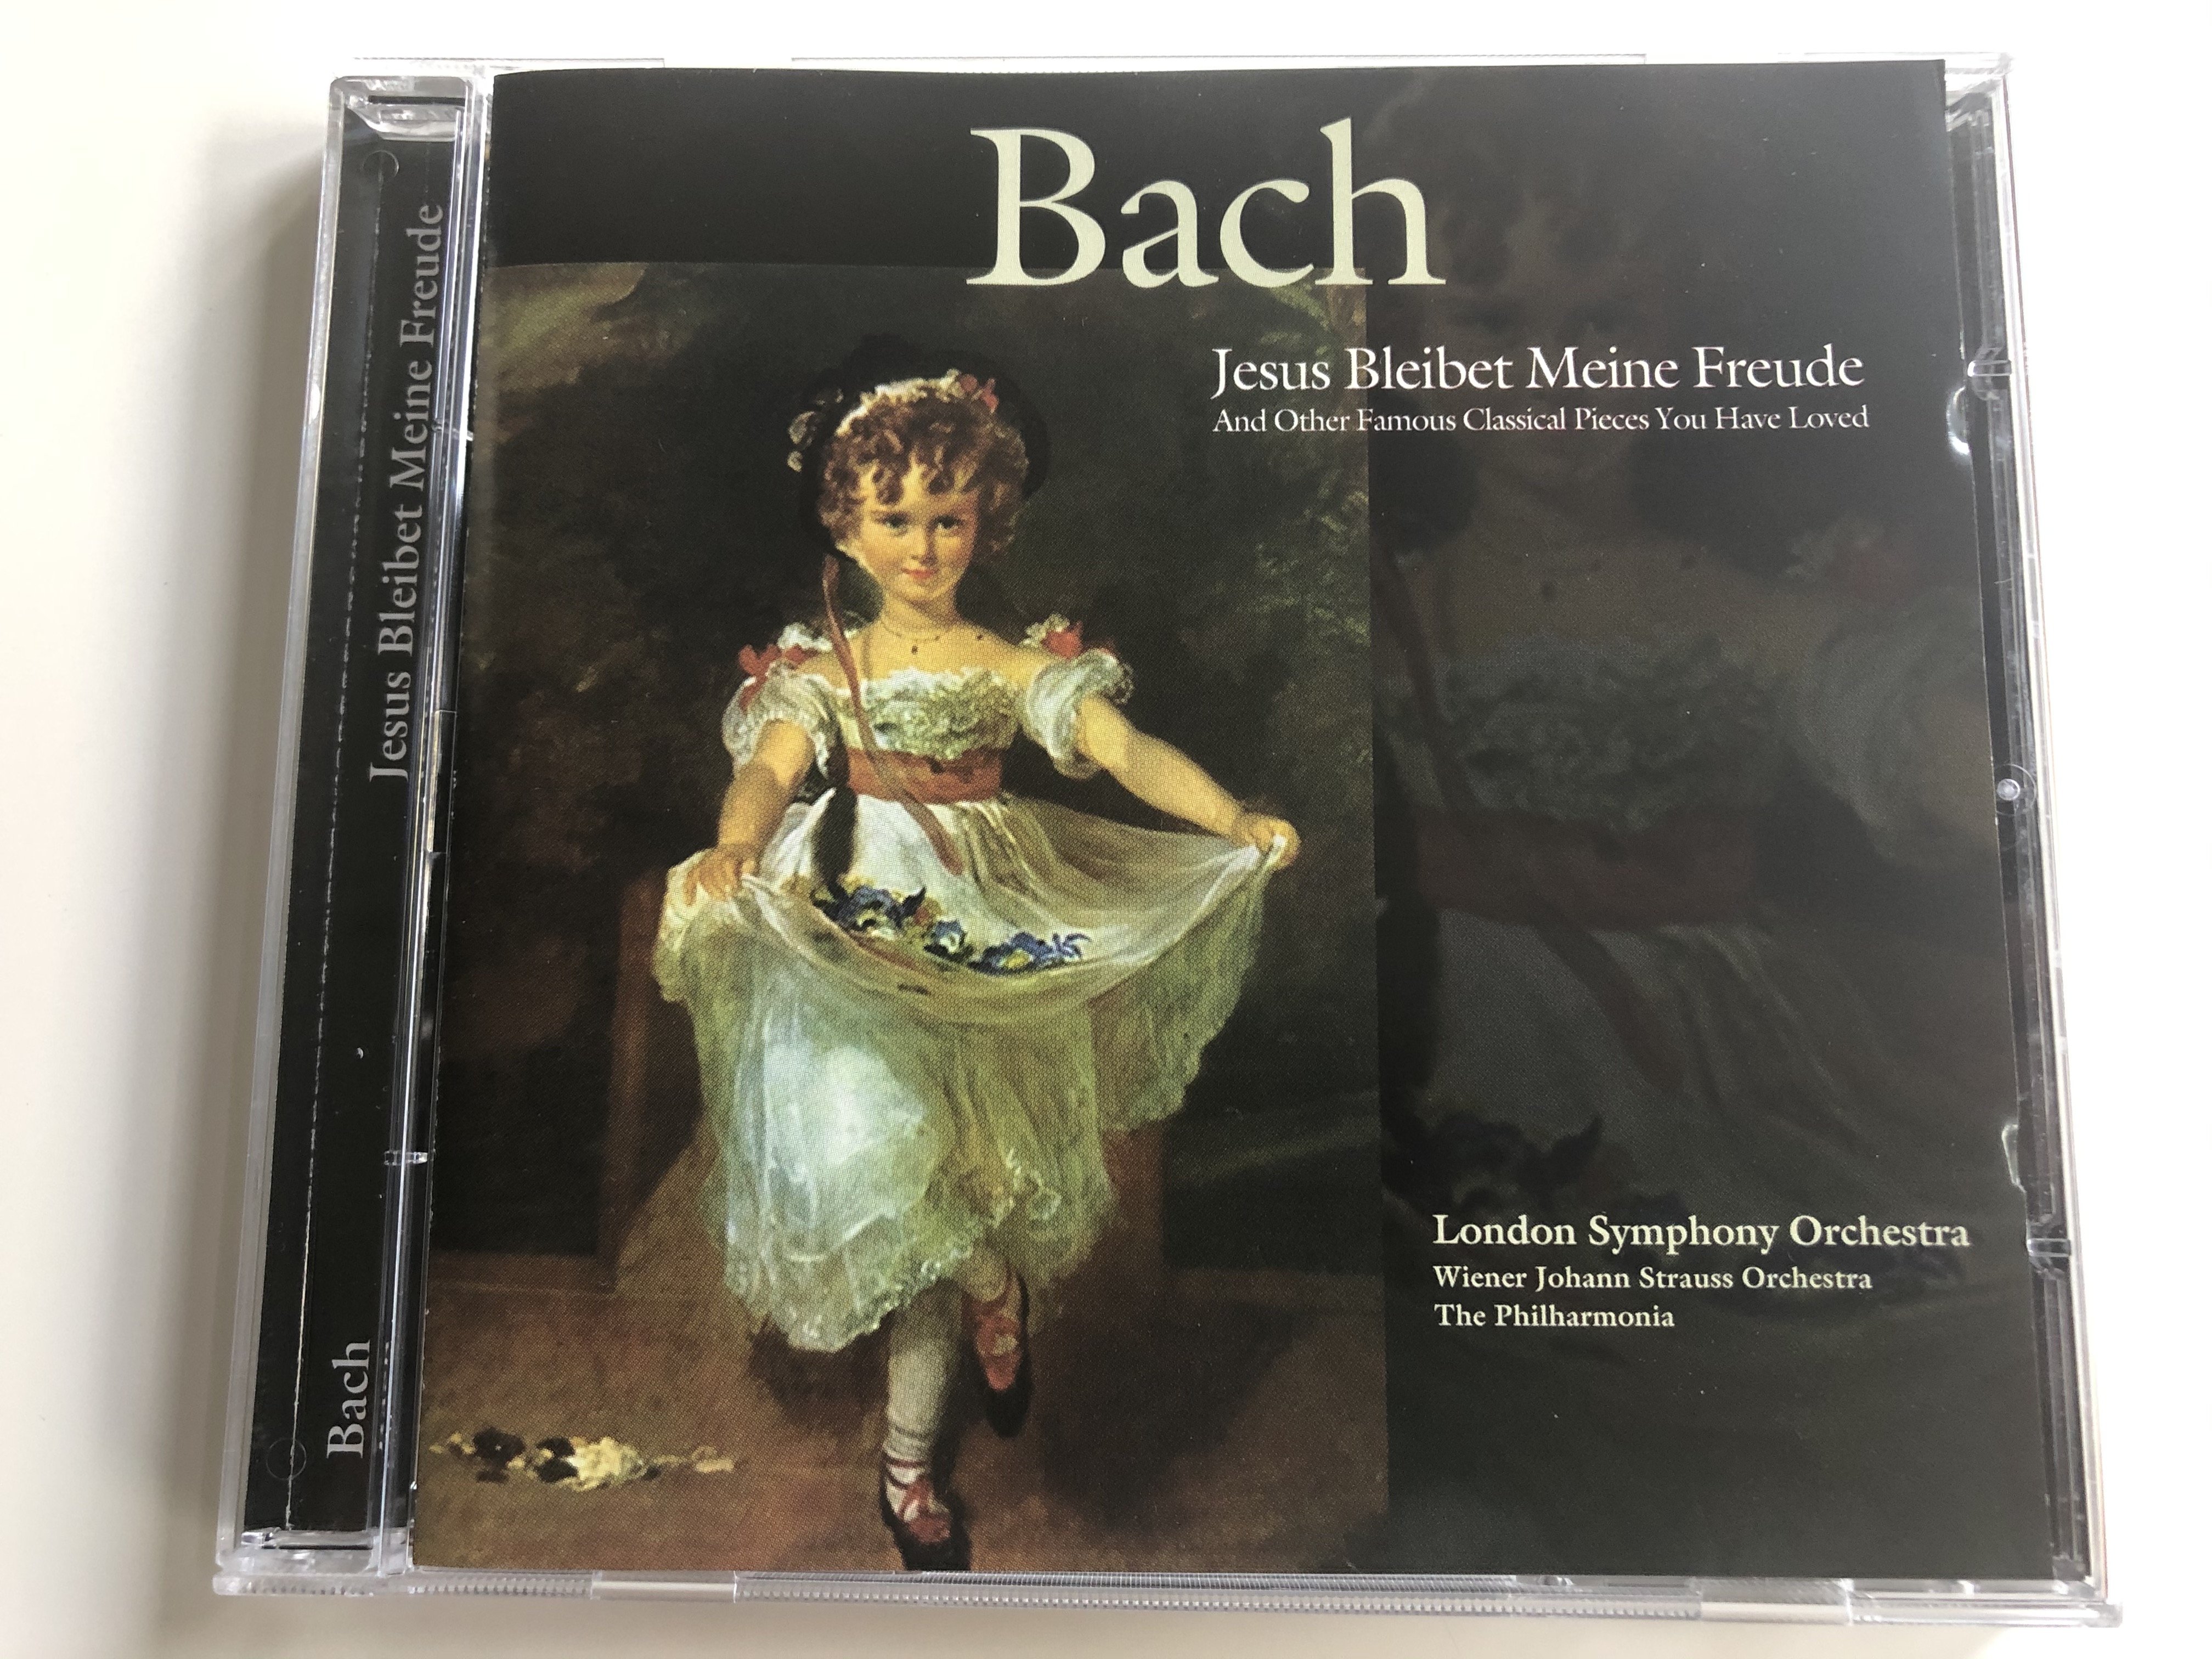 bach-jesus-bleibet-meine-freude-and-other-famous-classical-pieces-you-have-loved-london-symphony-orchestra-wiener-johann-strauss-orchestra-the-philharmonia-a-play-classics-audio-cd-1998-902-1-.jpg